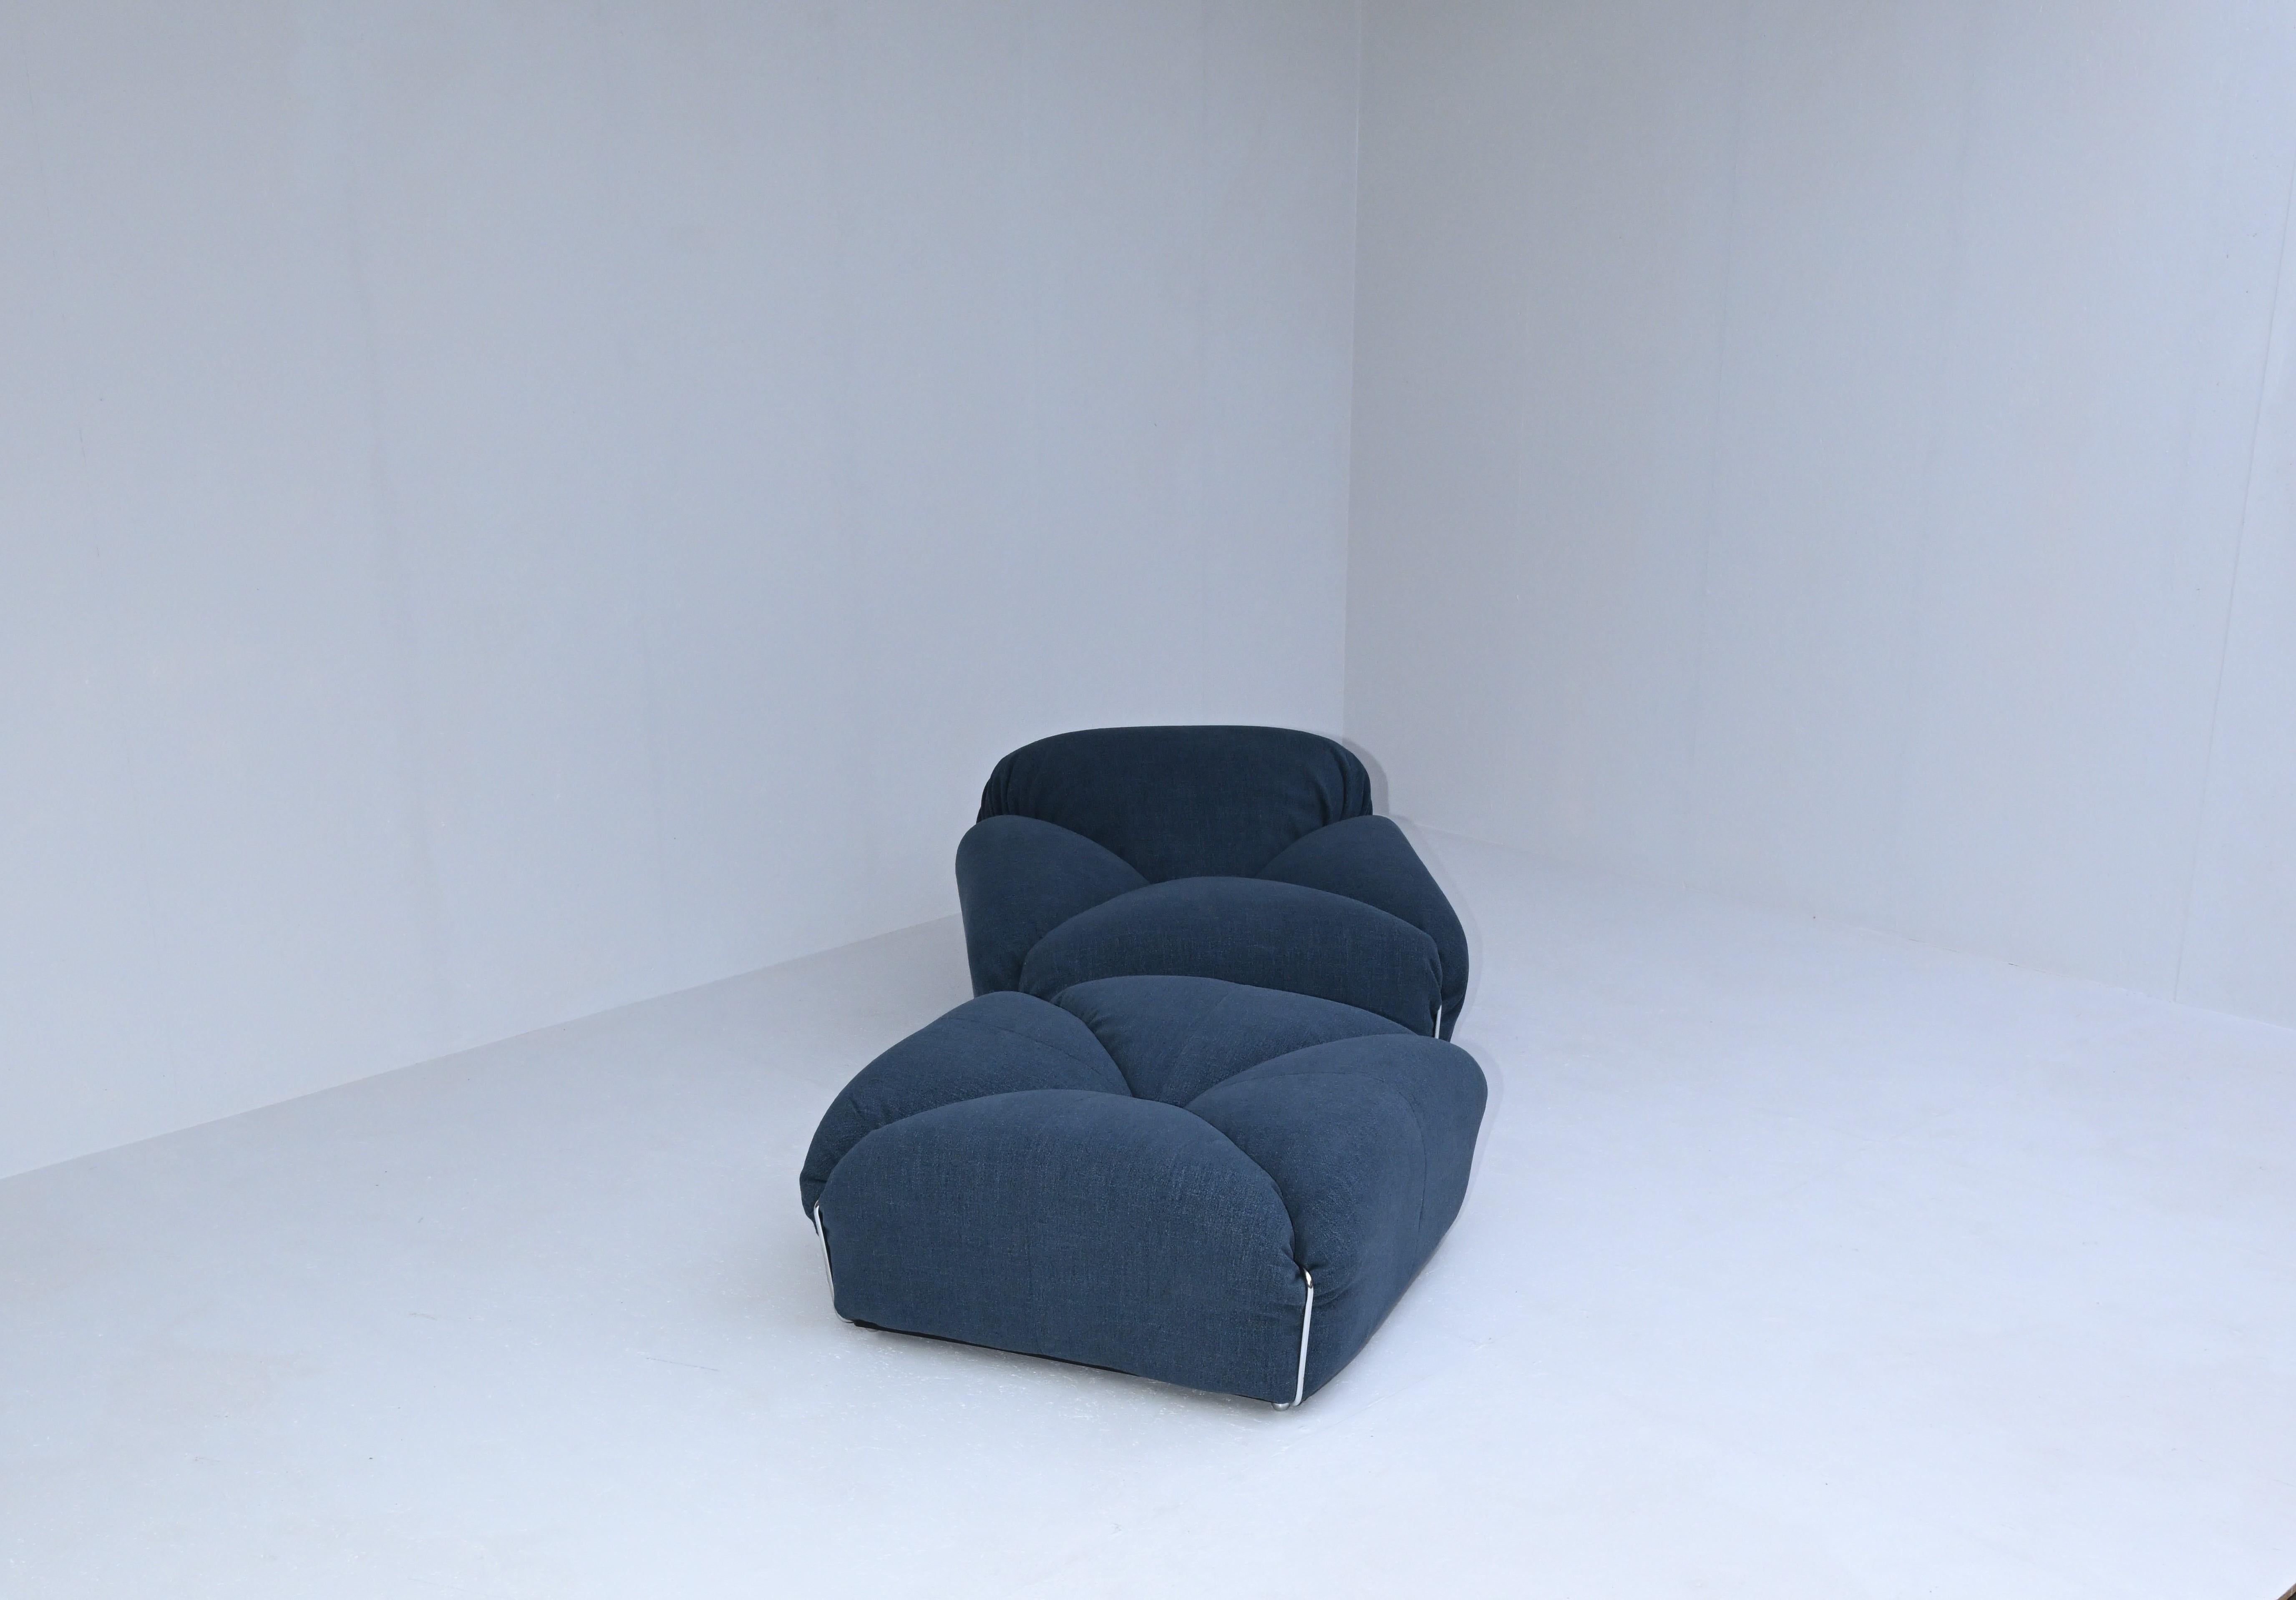 POP sofa by Antonio Citterio & Paola Nava for Vibieffe

Very comfy and rare sofa, completely reupholstered and in mint condition
2 white one seaters, 2 green one seaters and a blue one seater with hocker available

Dimensions: D97, W97, H60, SH 40